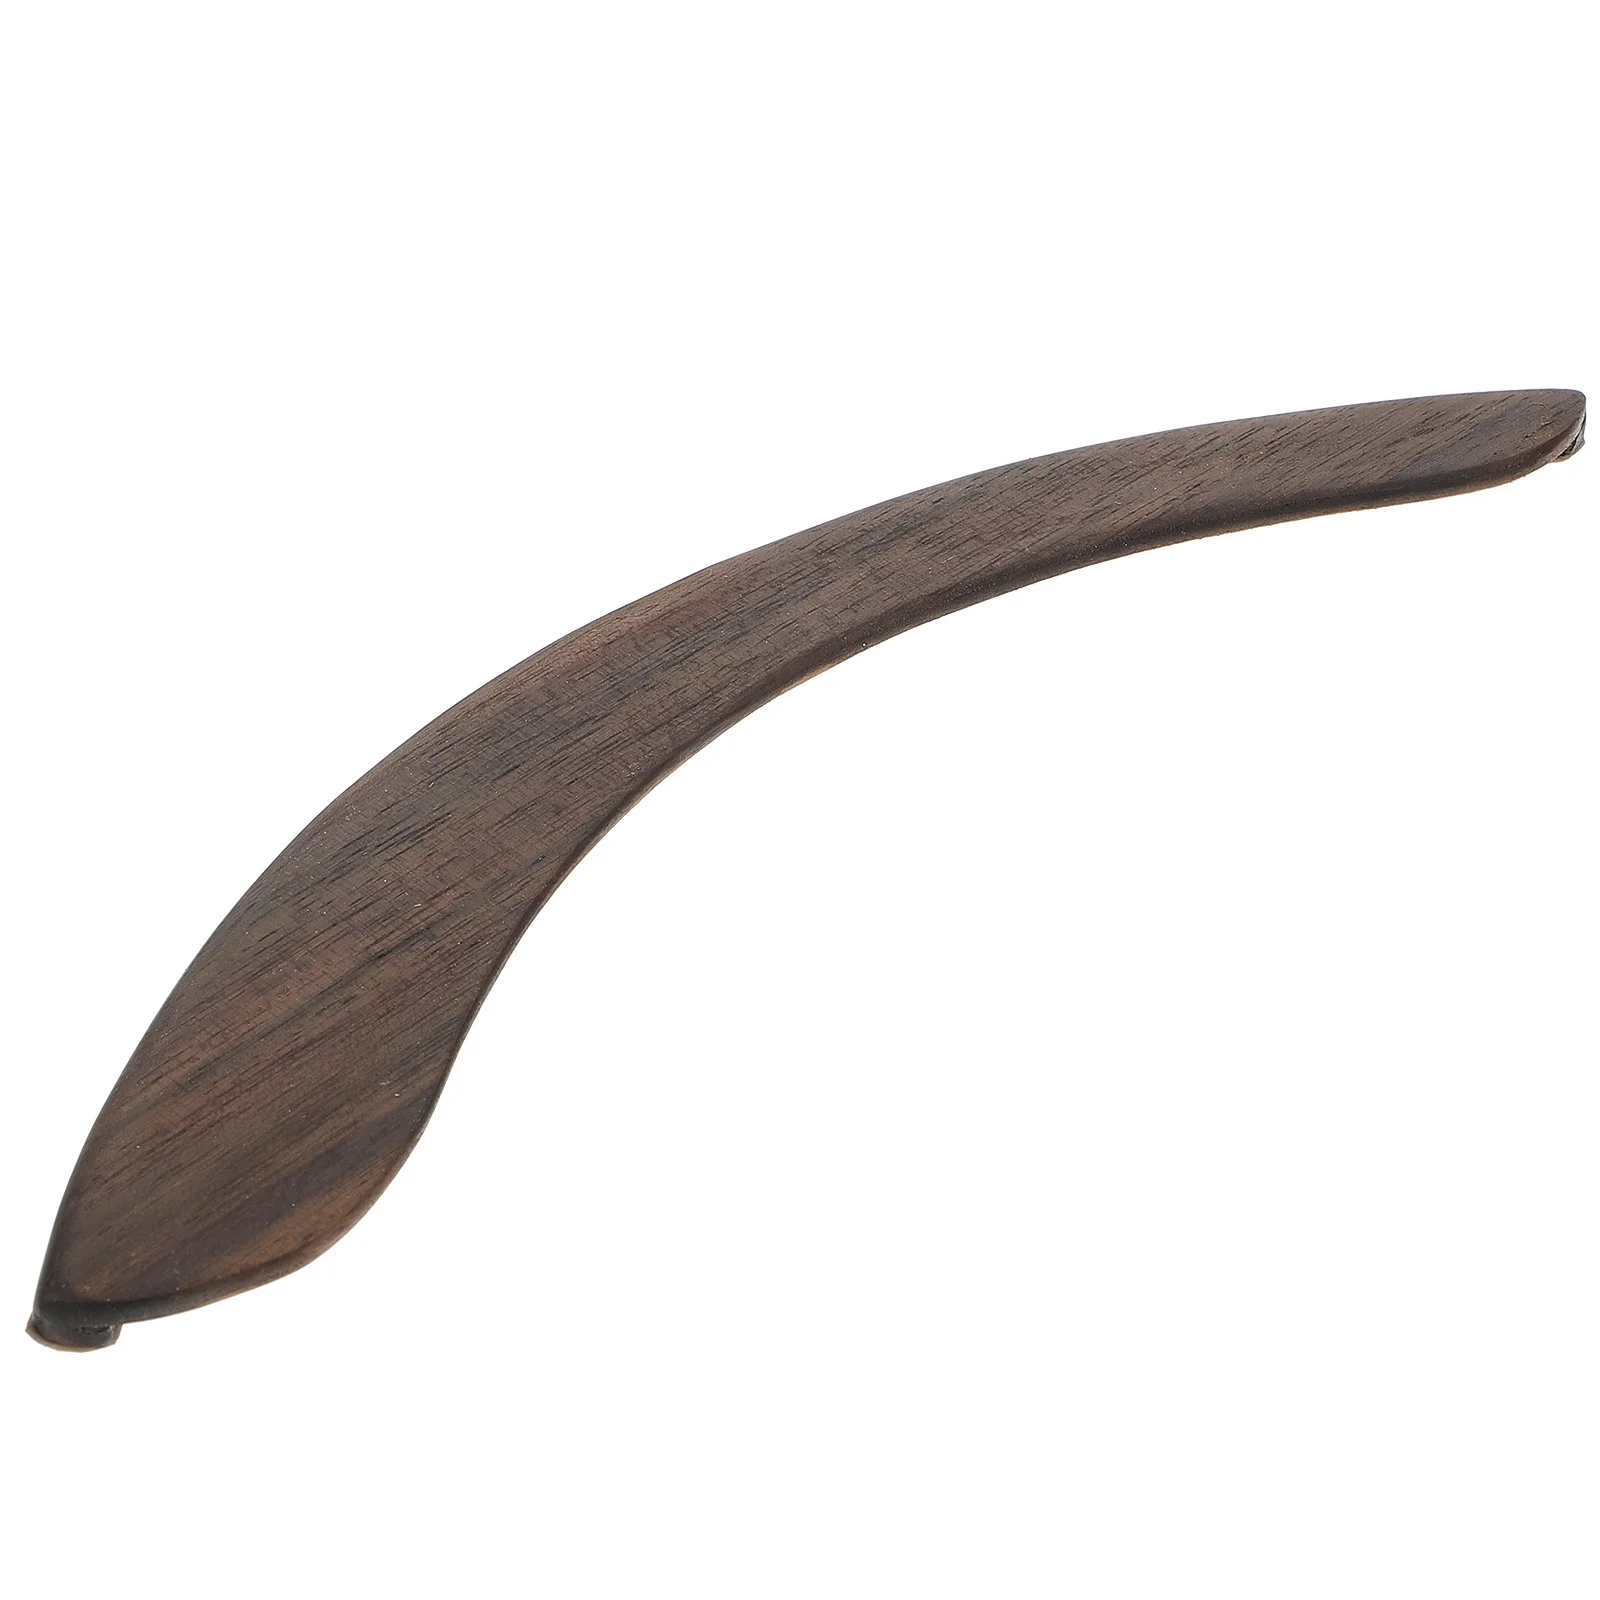 

Guitar Accessory Rest Hand Armrest Rubber Rosewood Supple Wooden Anti Skid Part Wearable Wear Resistant Protection Wood Non